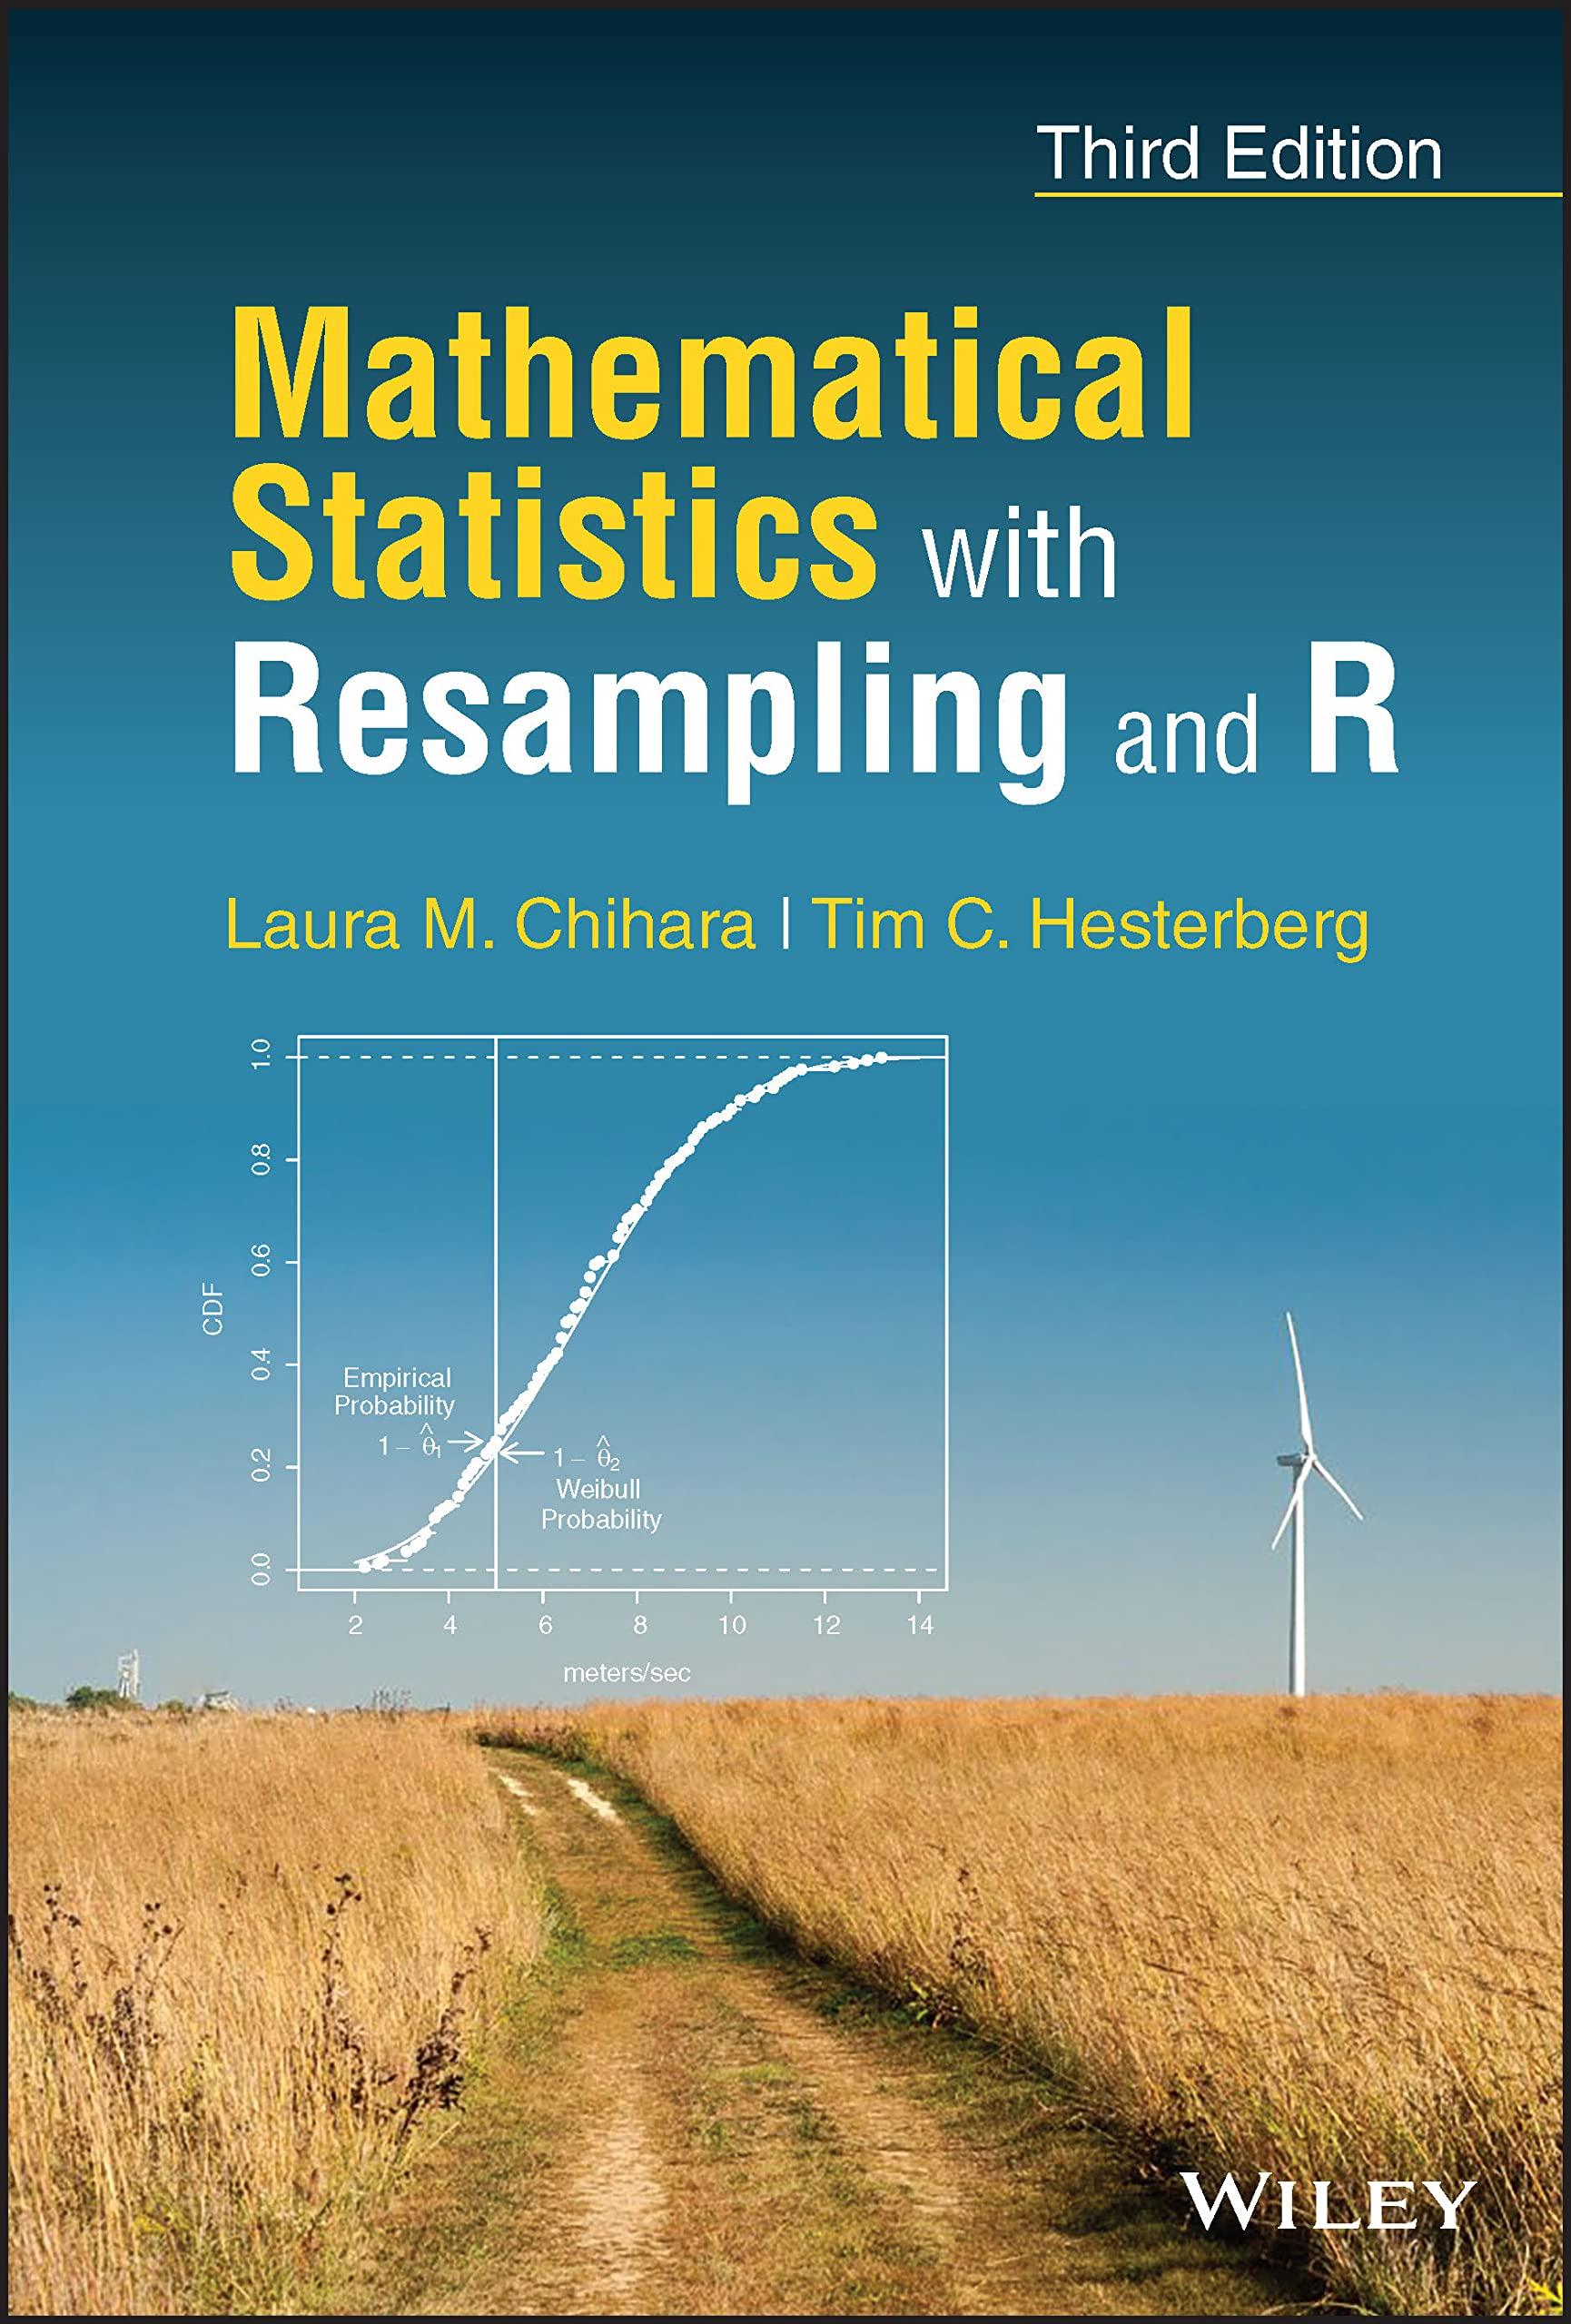 mathematical statistics with resampling and r 3rd edition laura m. chihara, tim c. hesterberg 1119874033,